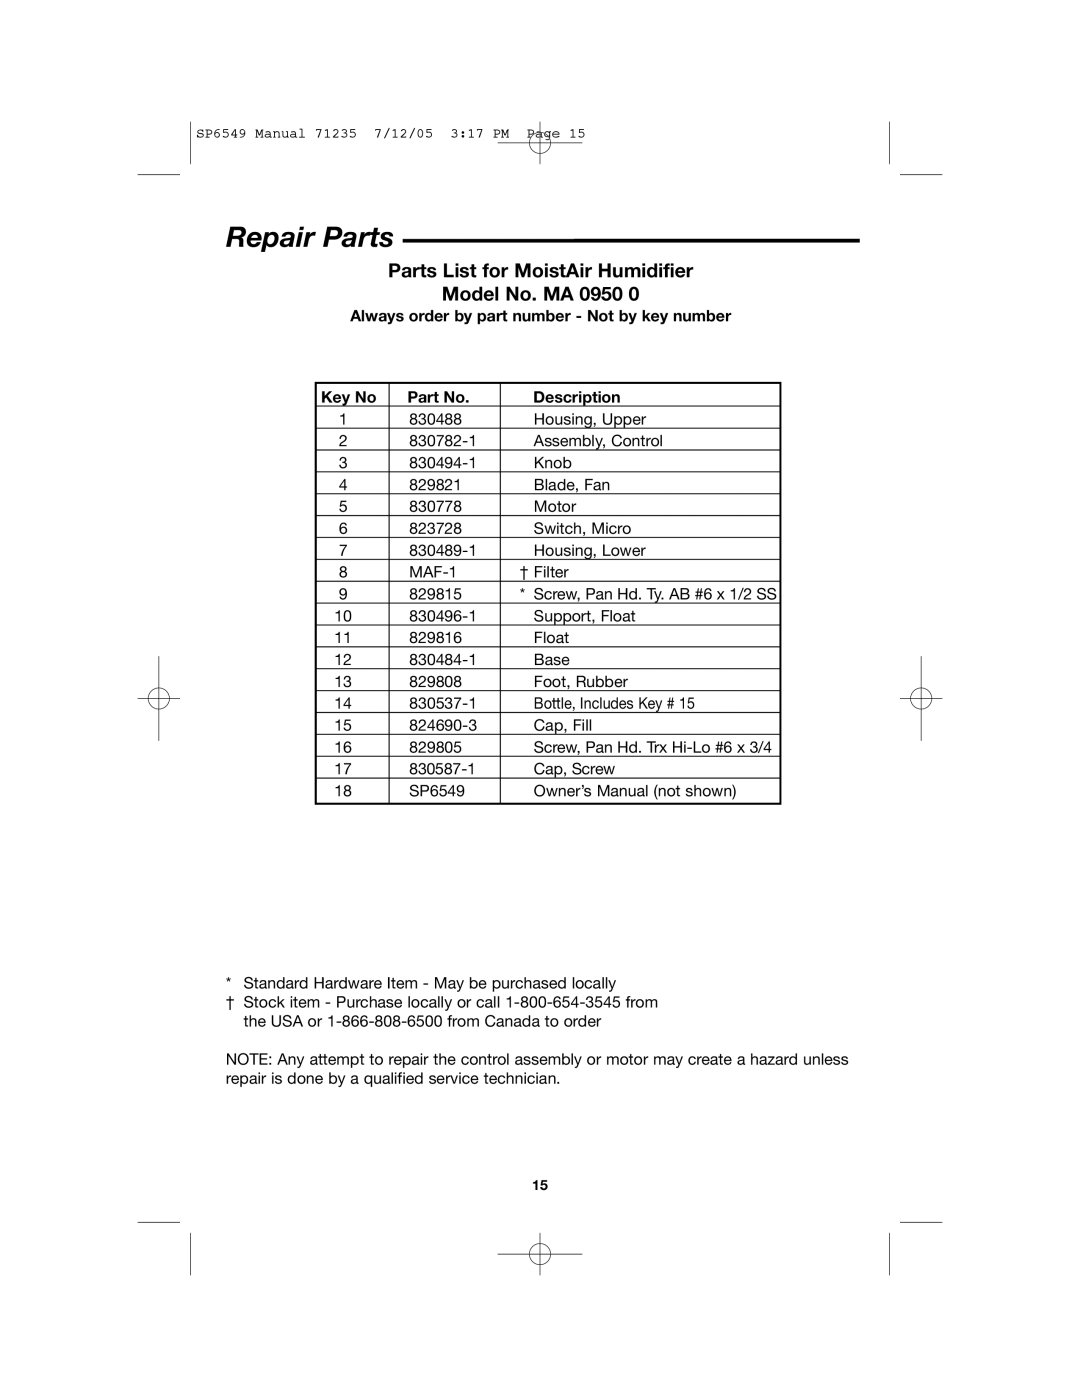 MoistAir MA 0950 owner manual Repair Parts, Parts List for MoistAir Humidifier, Model No. MA, Description 